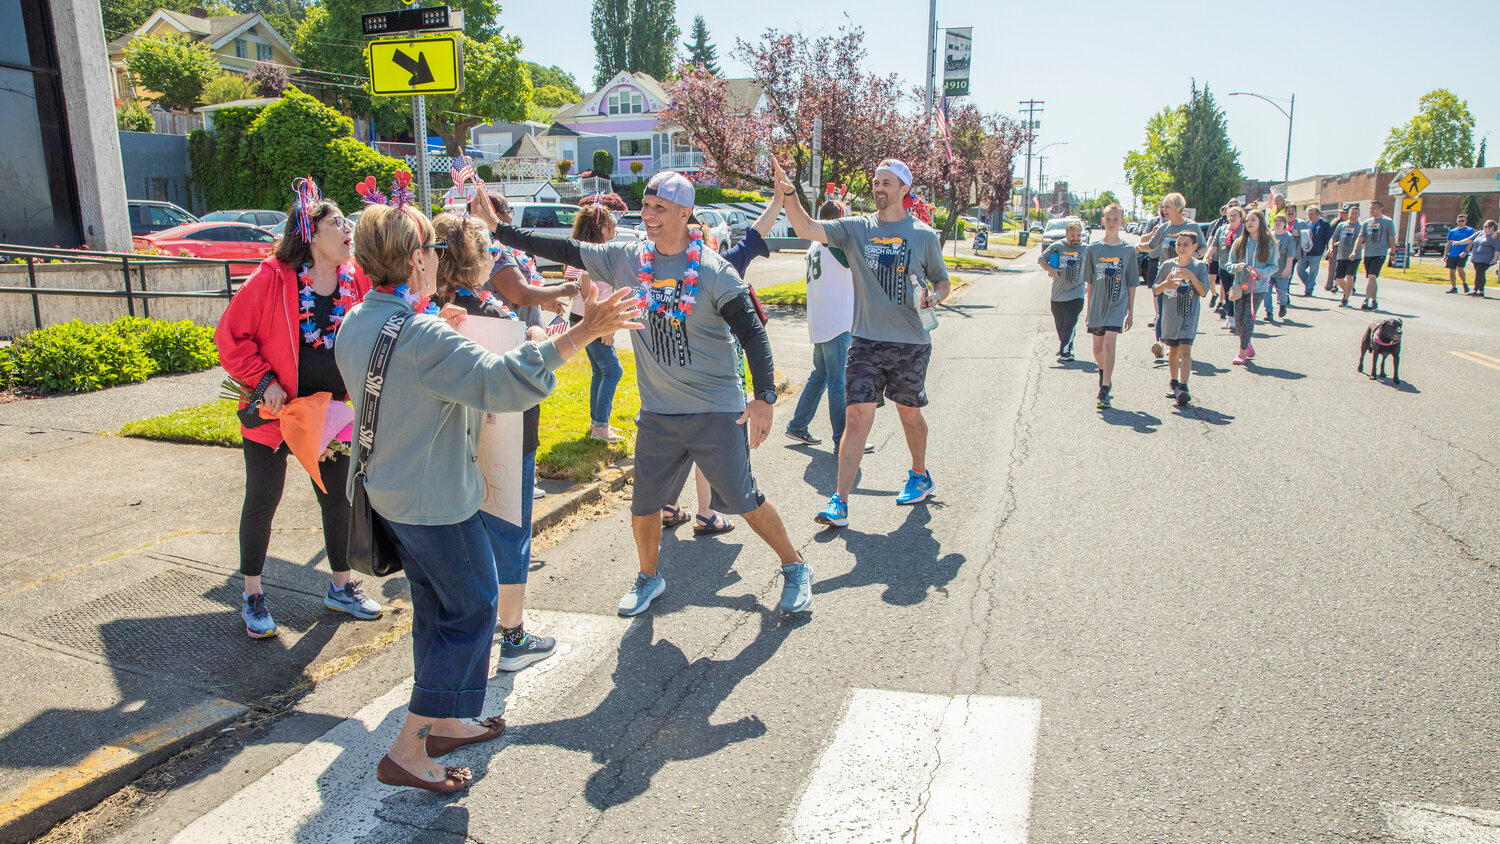 State Rep. Peter Abbarno and Commissioner Sean Swope participate in the Lewis County Special Olympics Law Enforcement Torch Run while greeting supporters outside outside Chehalis City Hall on Friday, June 2.